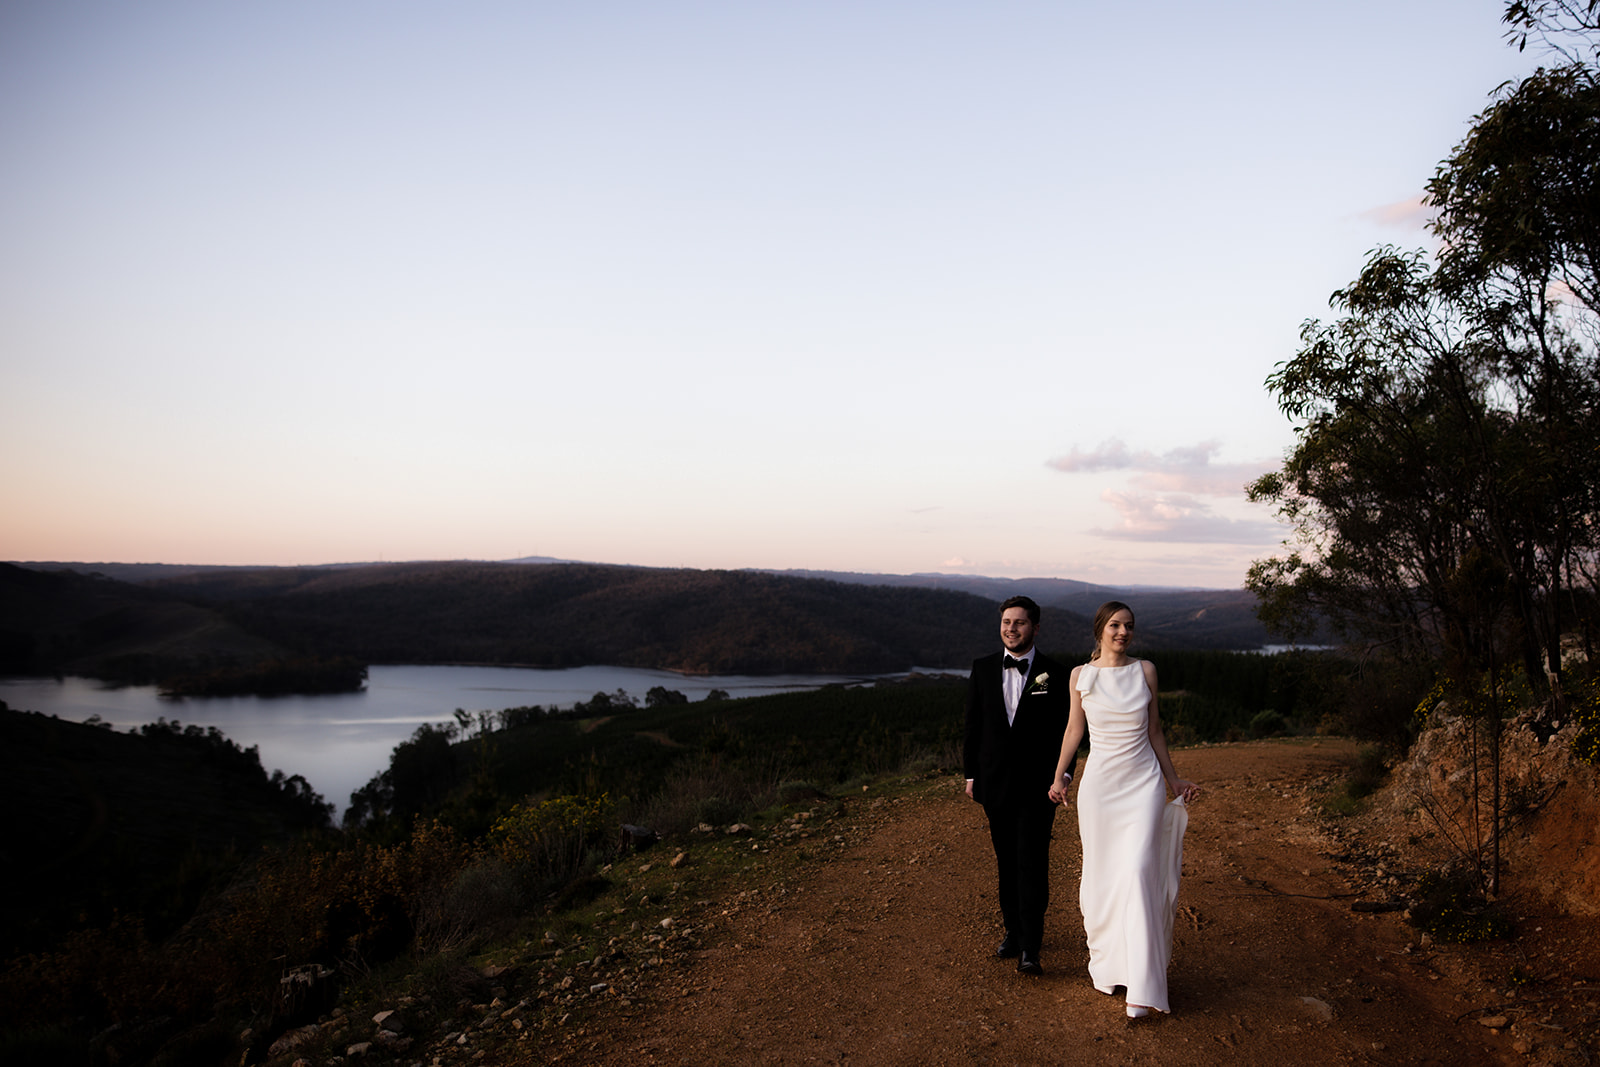 Located in the heart of the picturesque Adelaide Hills, Anvers Wines is a luxurious full-service wedding venue in Kangarilla which effortlessly blends old-world charm with modern sophistication.